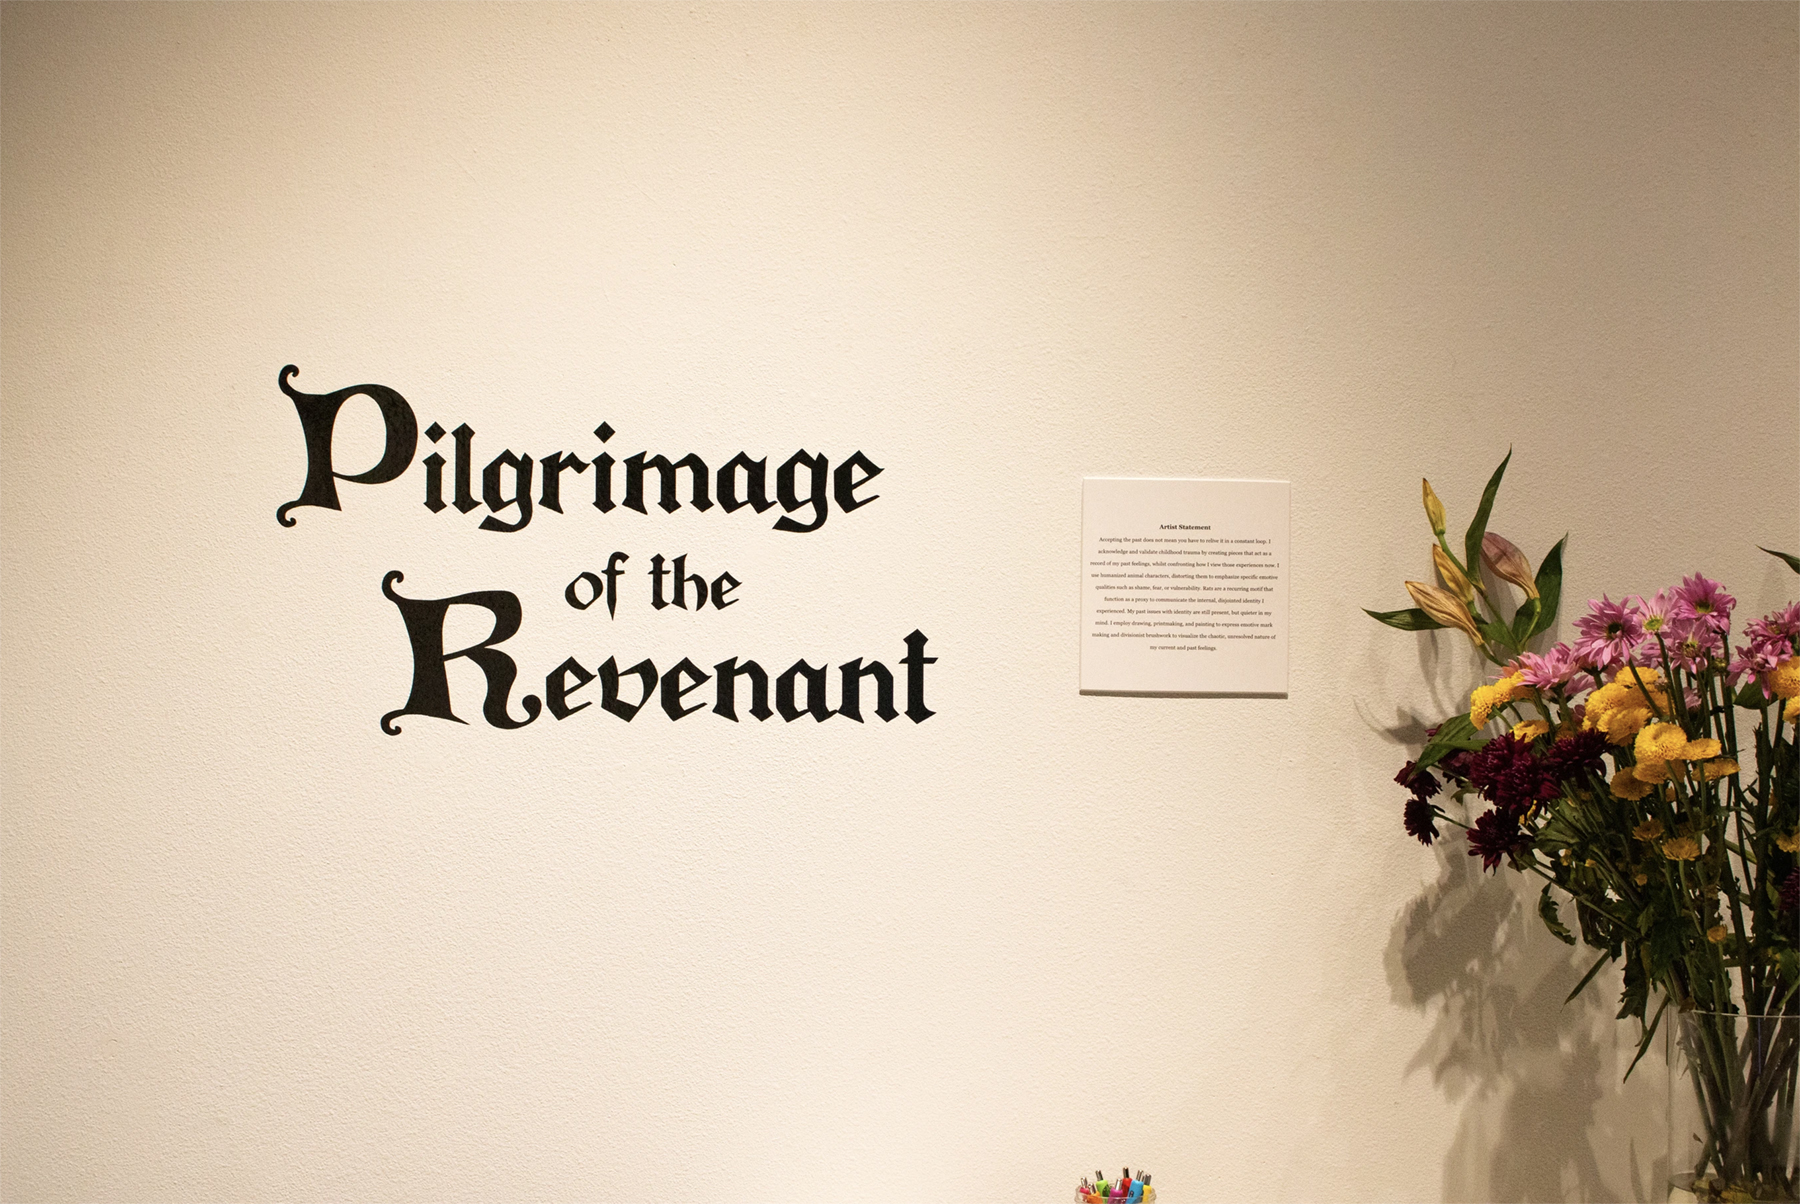 Image of the show title at Chana Stern's reception for "Pilgrimage of the Revenant", courtesy of the artist